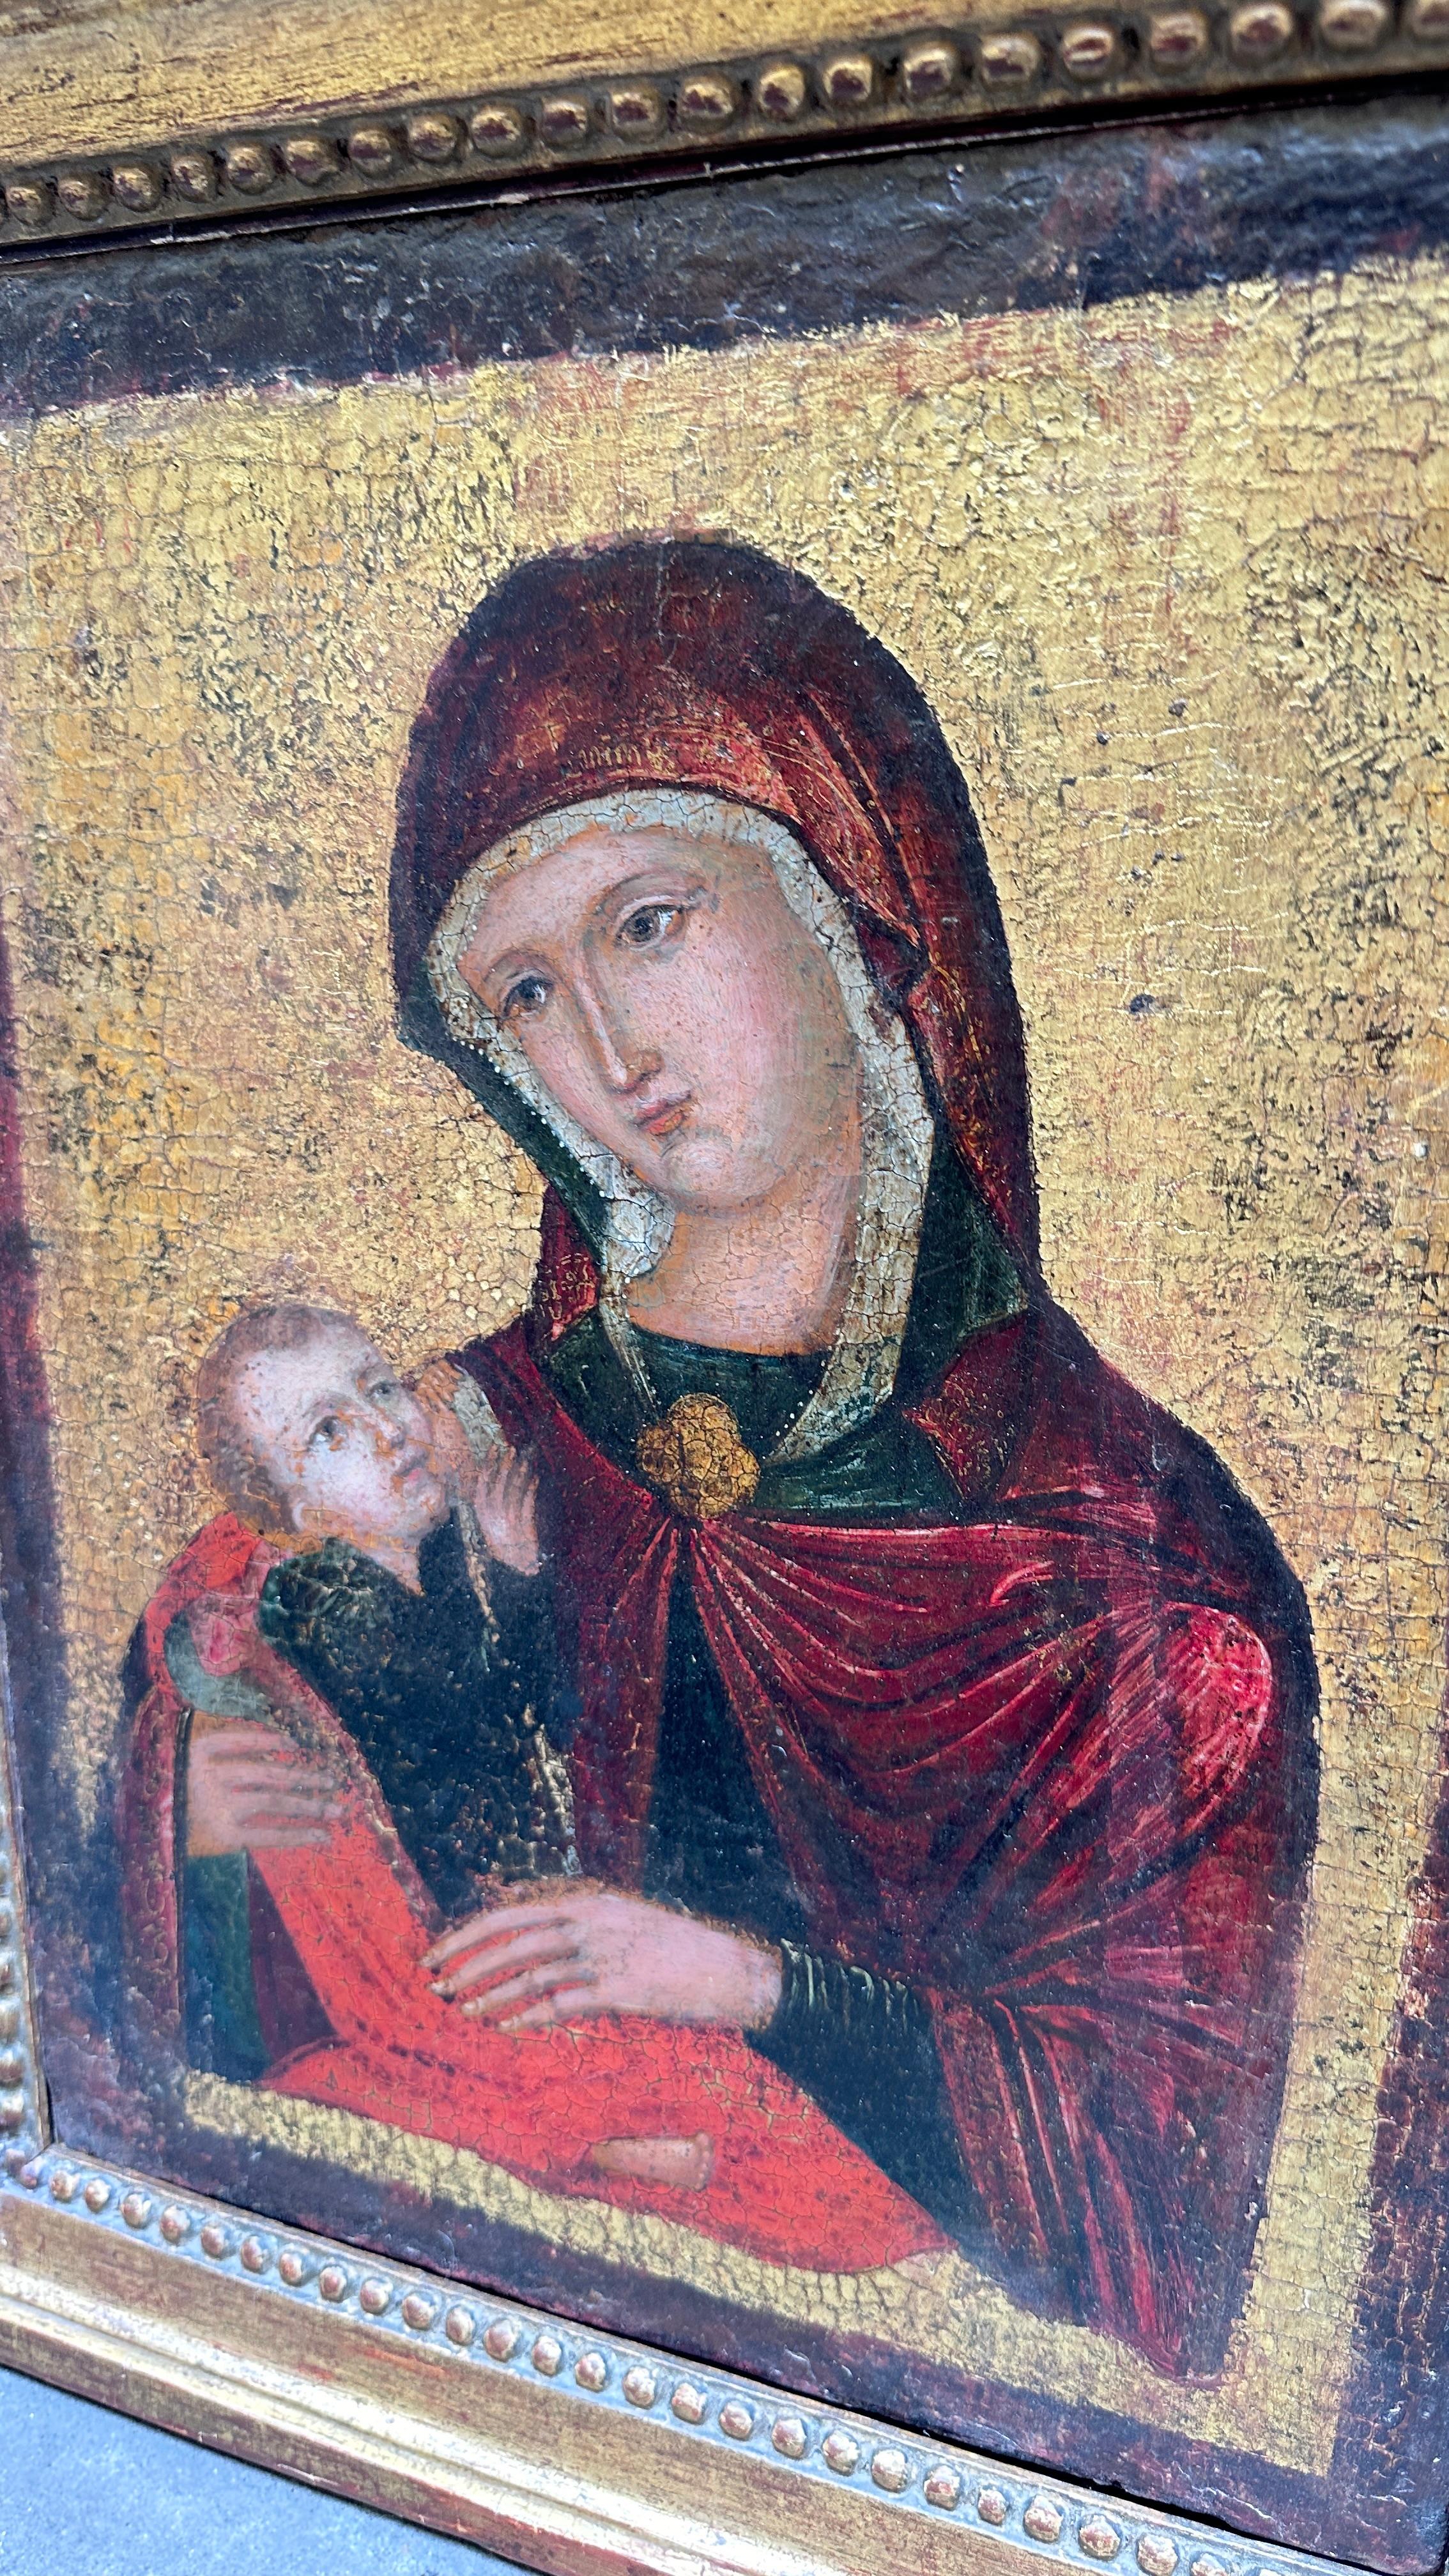 Renaissance 16th CENTURY VIRGIN MARY WITH CHILD ON A GOLDEN BACKGROUND 